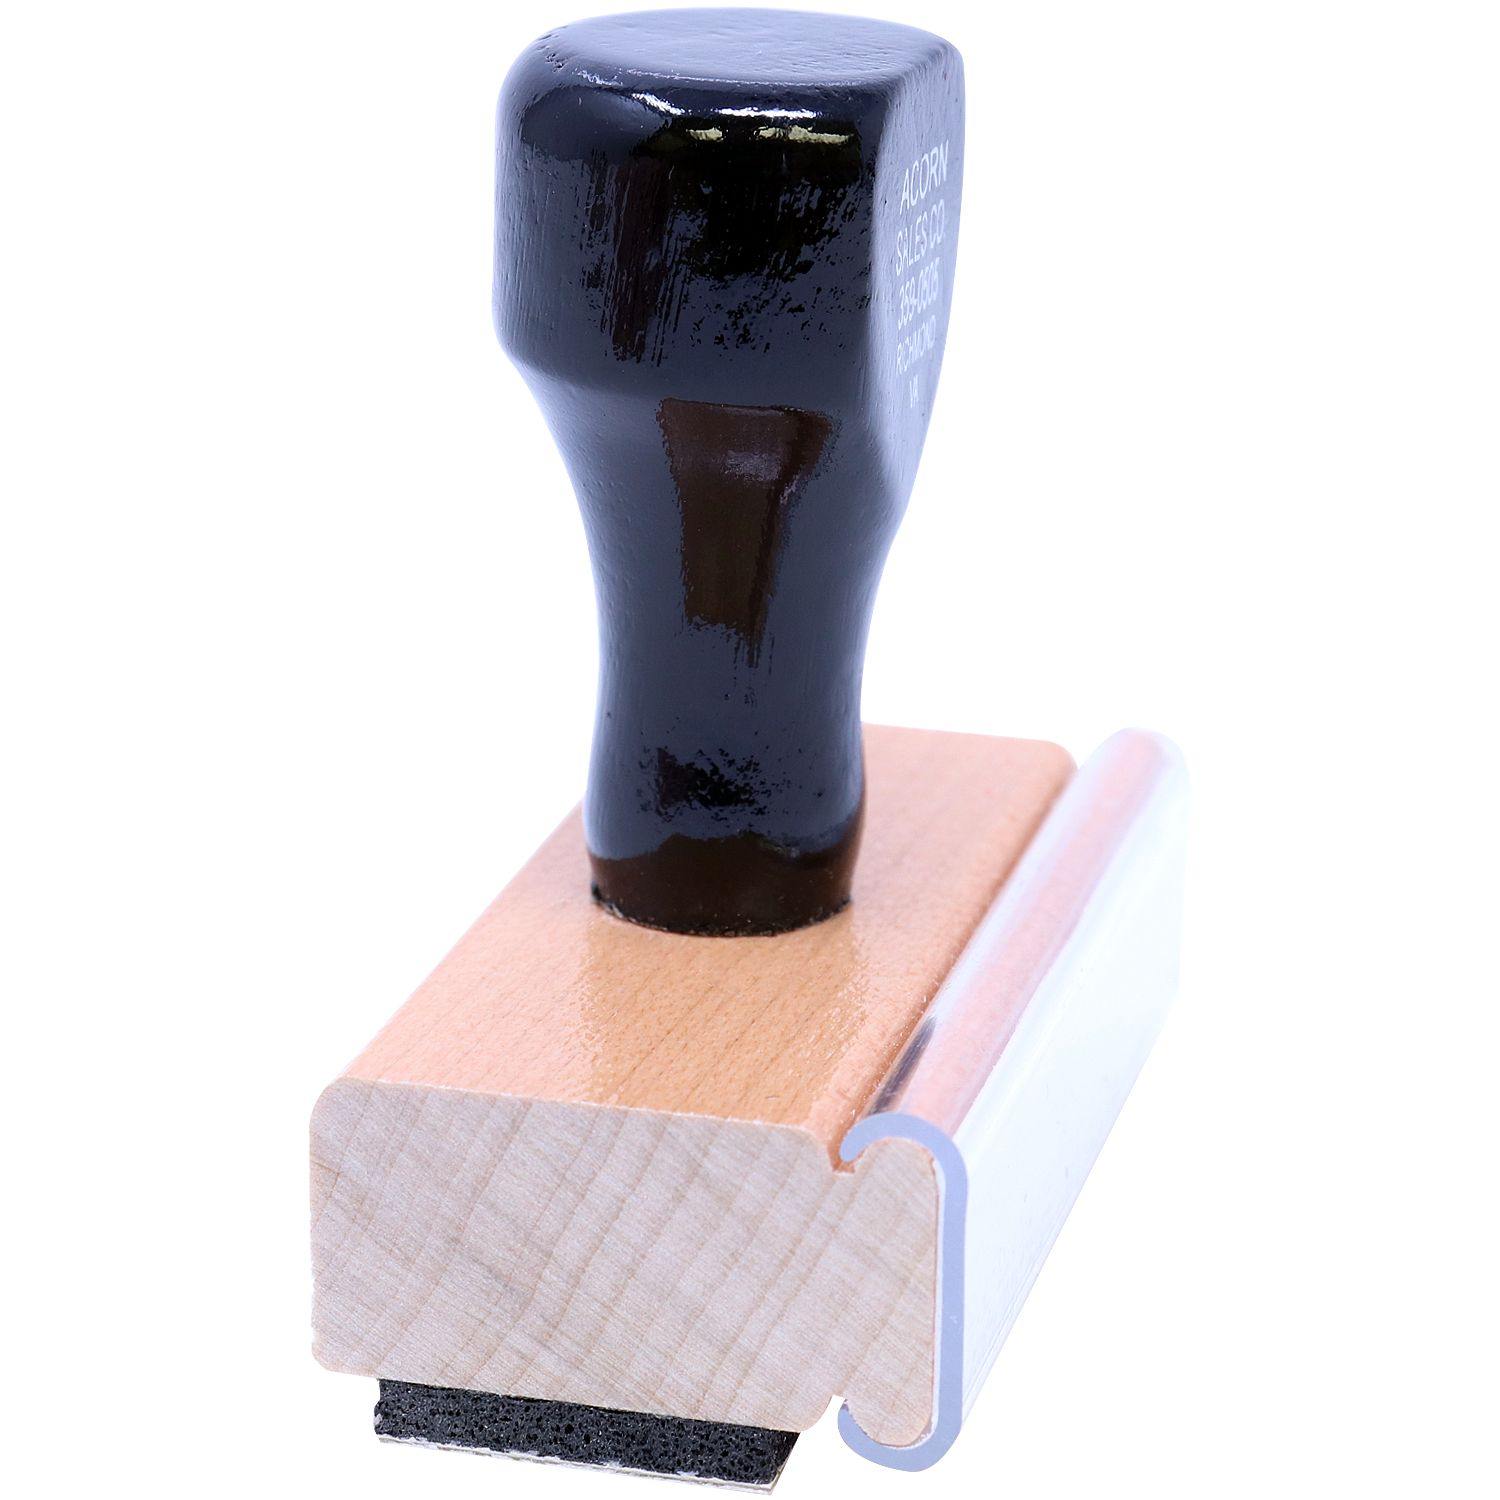 Side View of Large Need To Improve Listening Rubber Stamp at an Angle